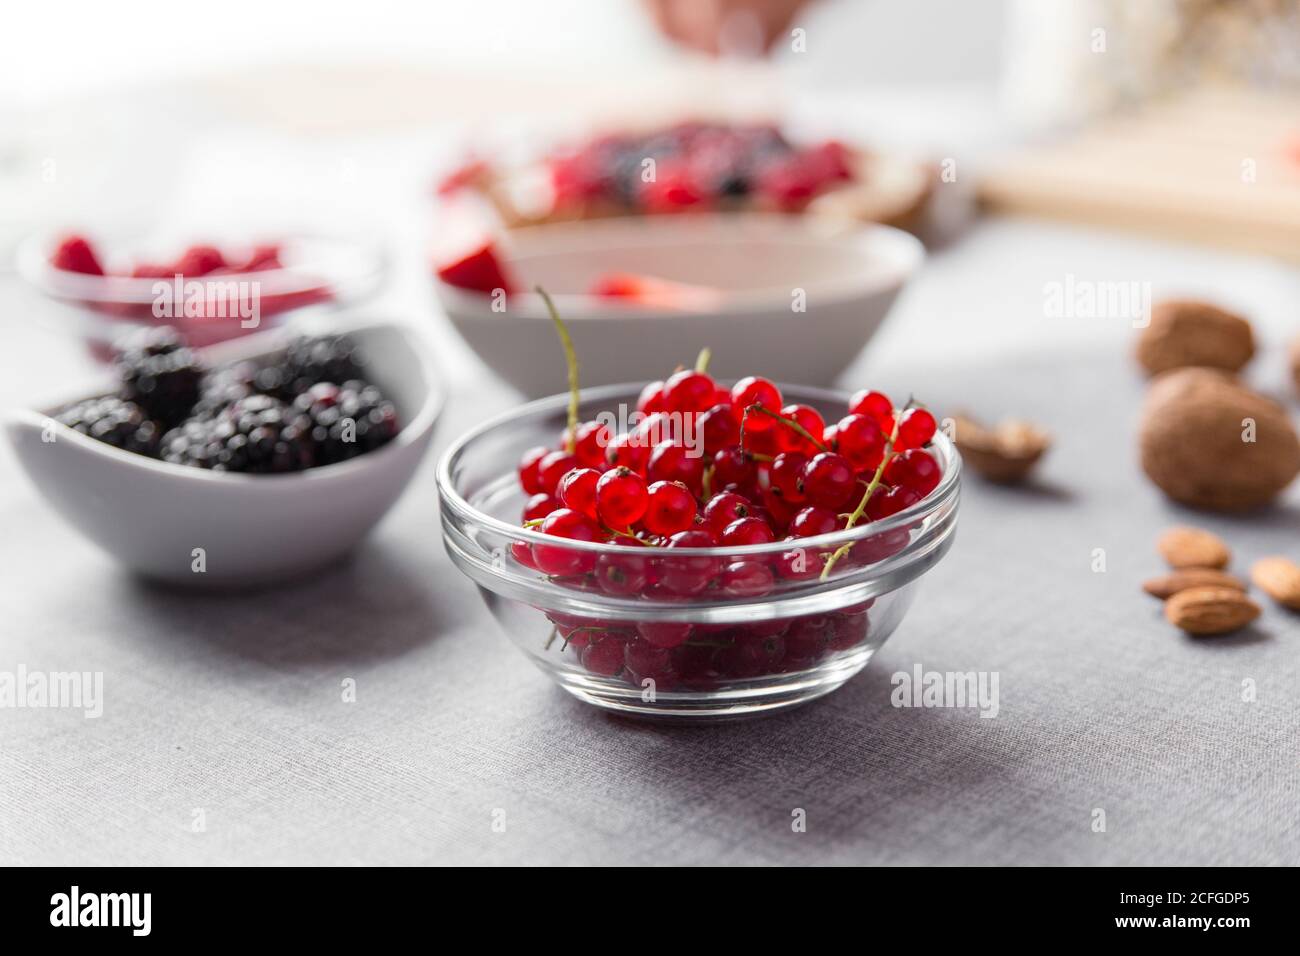 Ingredients for a berries cake Stock Photo